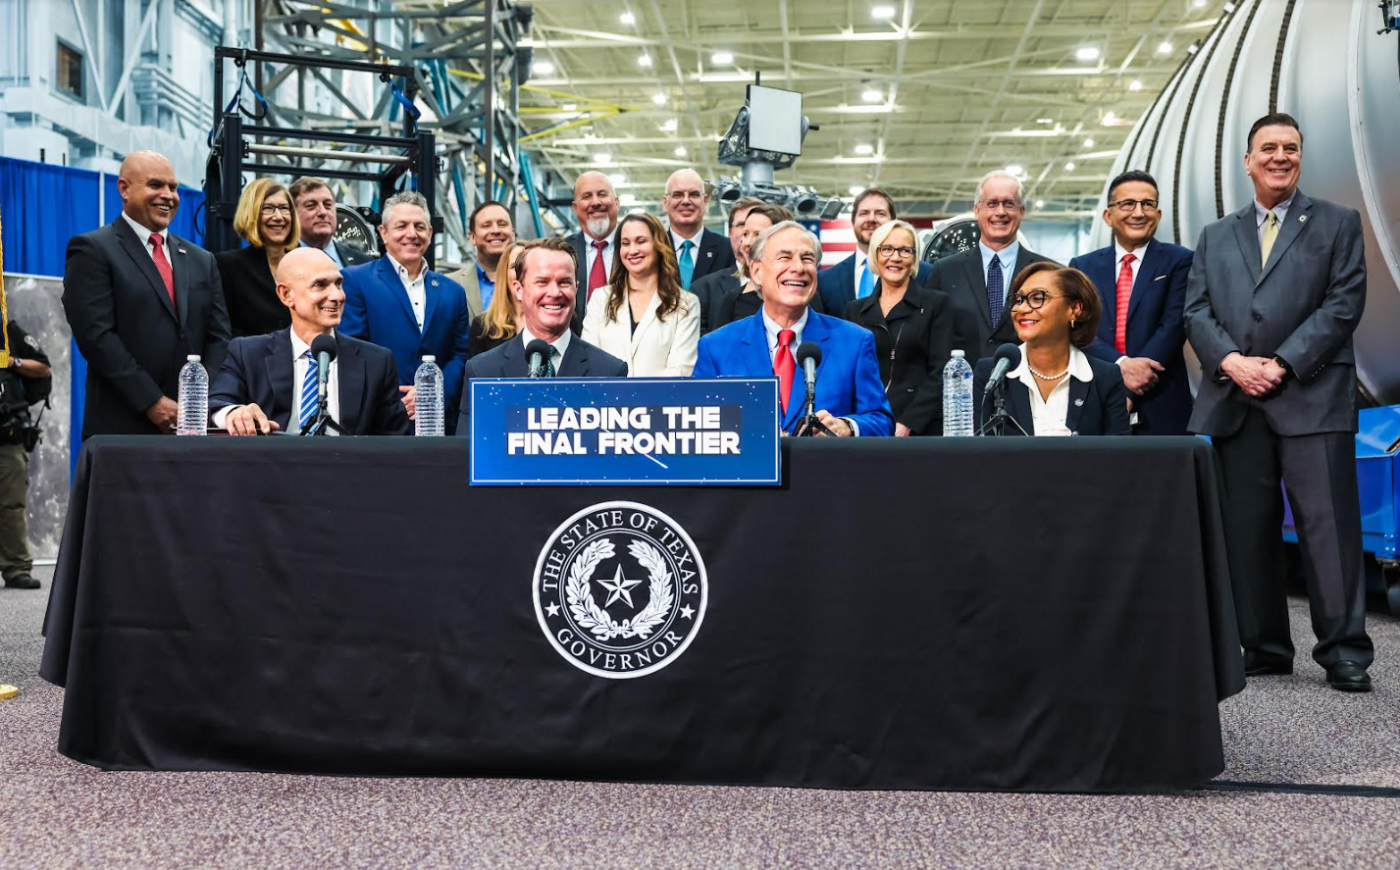 Governor Abbott Unveils Leadership Change at Texas Space Commission